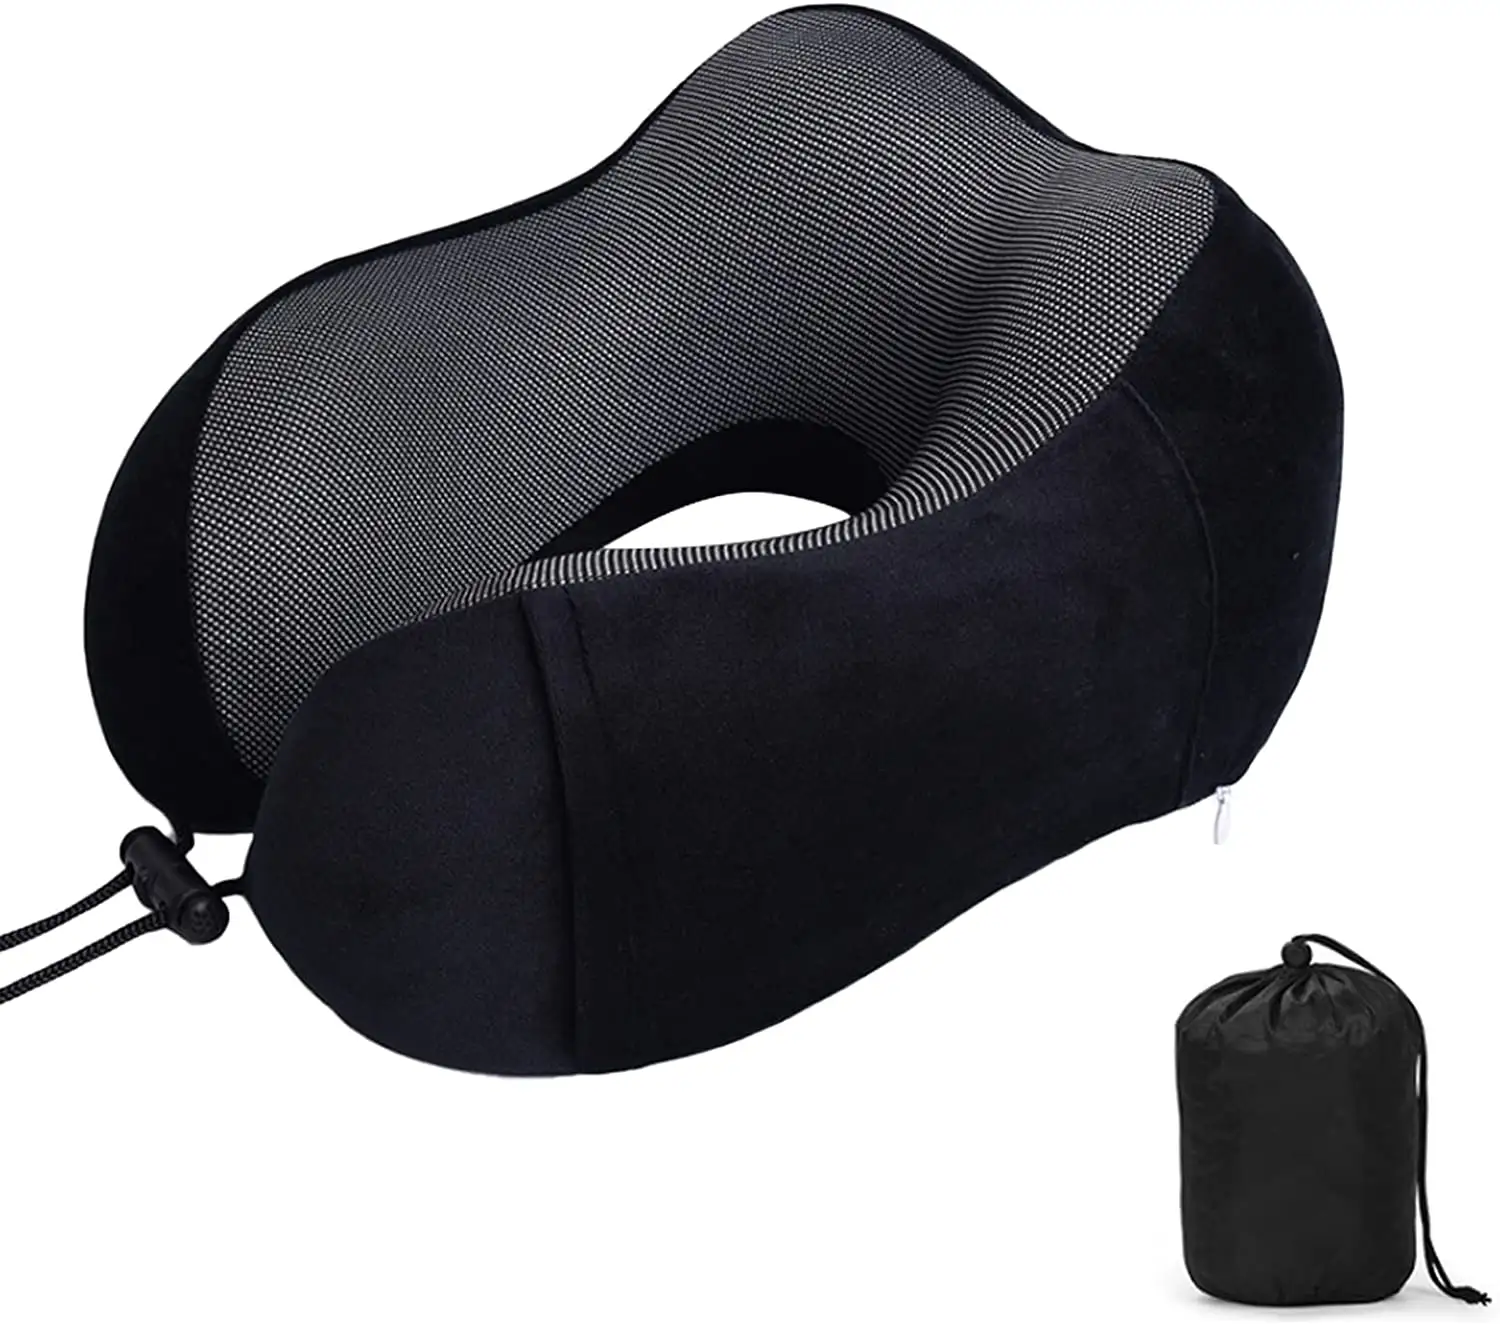 U-Shape Chin Supporting Travel Pillow Neck Pillow Memory Foam Pillow for Sleeping Rest, Airplane Car & Home Use (Black)